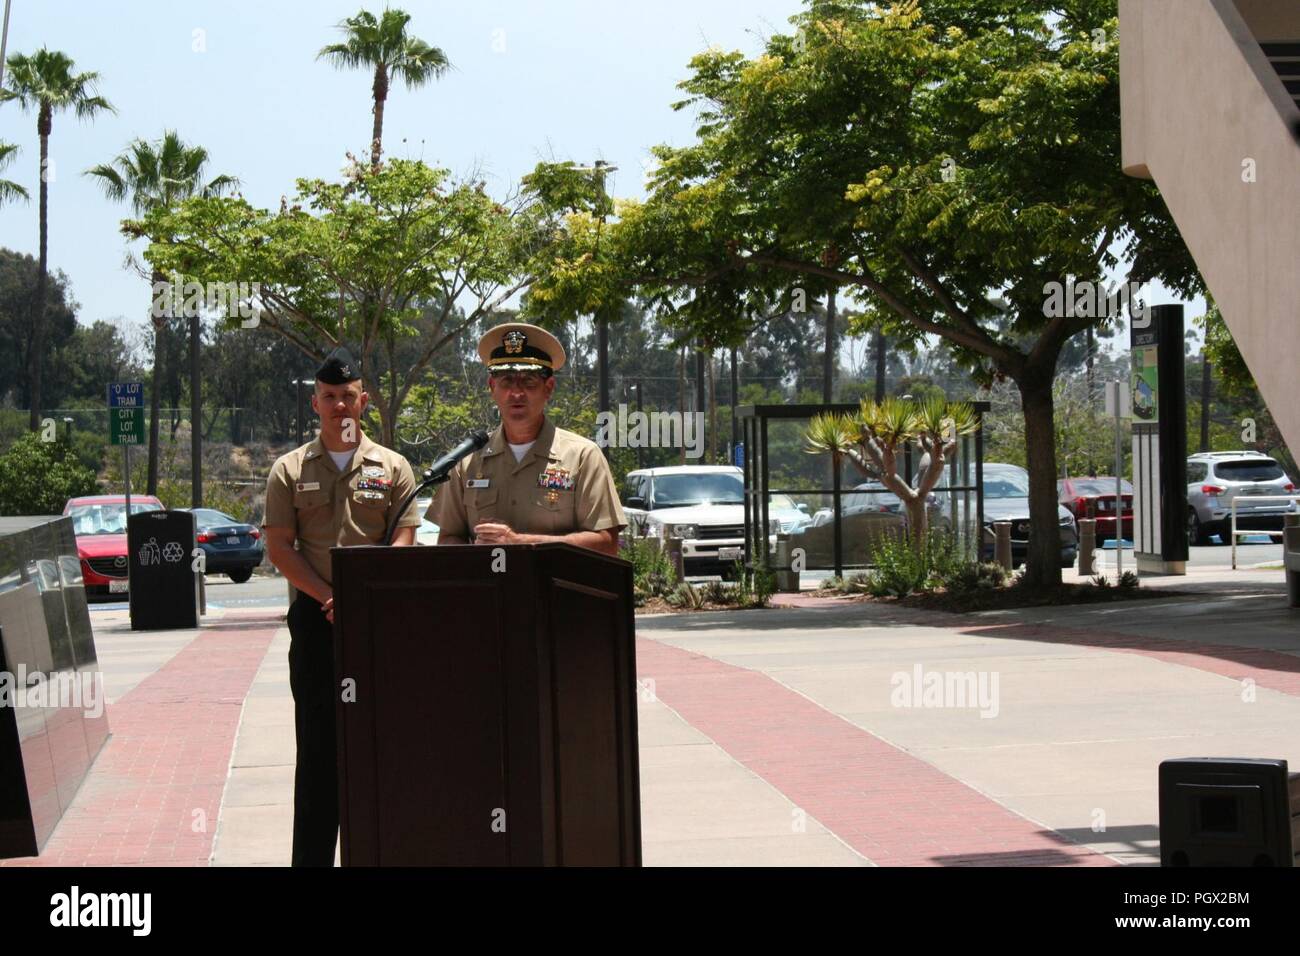 Capt. Joel Roos, commanding officer, Naval Medical Center San Diego, provides remarks during a midday ceremony held at Naval Medical Center San Diego, June 15, 2018, in observance of the U.S. Navy Hospital Corps’ 120th birthday. Traditionally, Hospital Corpsmen pause annually to observe the Hospital Corps birthday. Stock Photo